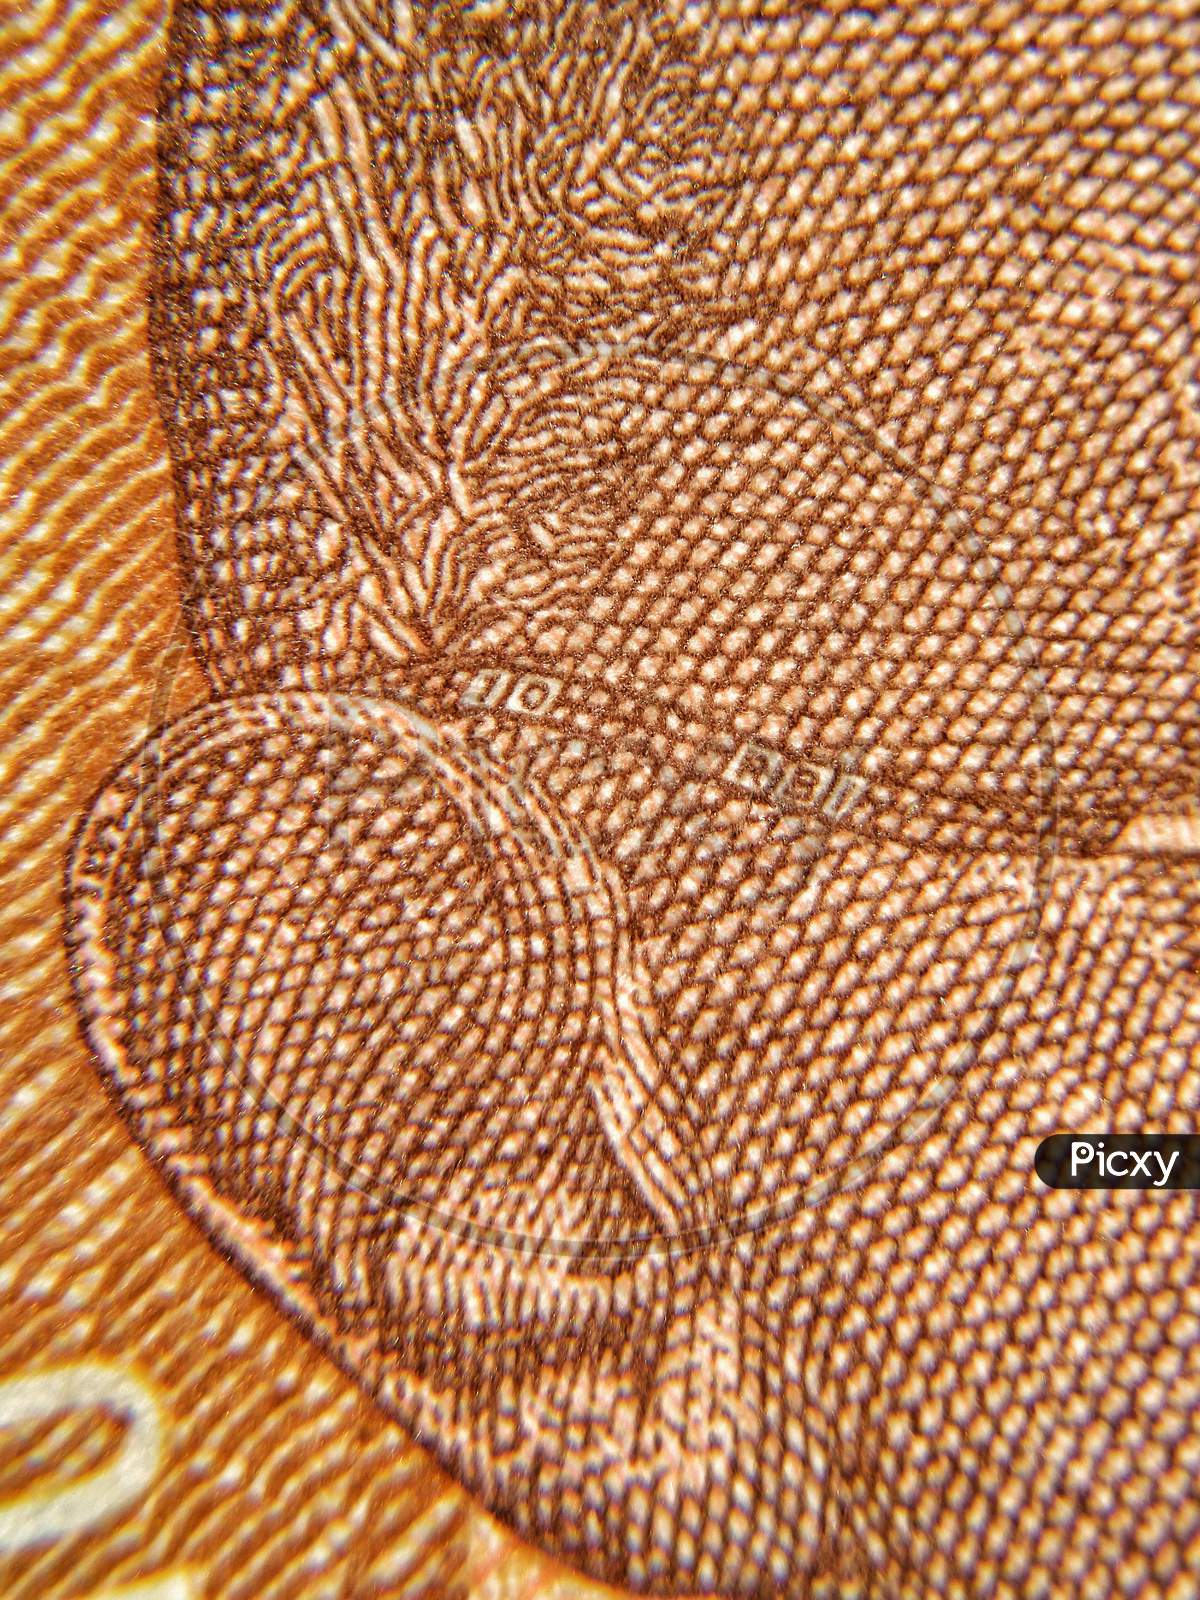 10 rupees Indian new note close Up, macro. demonetization.